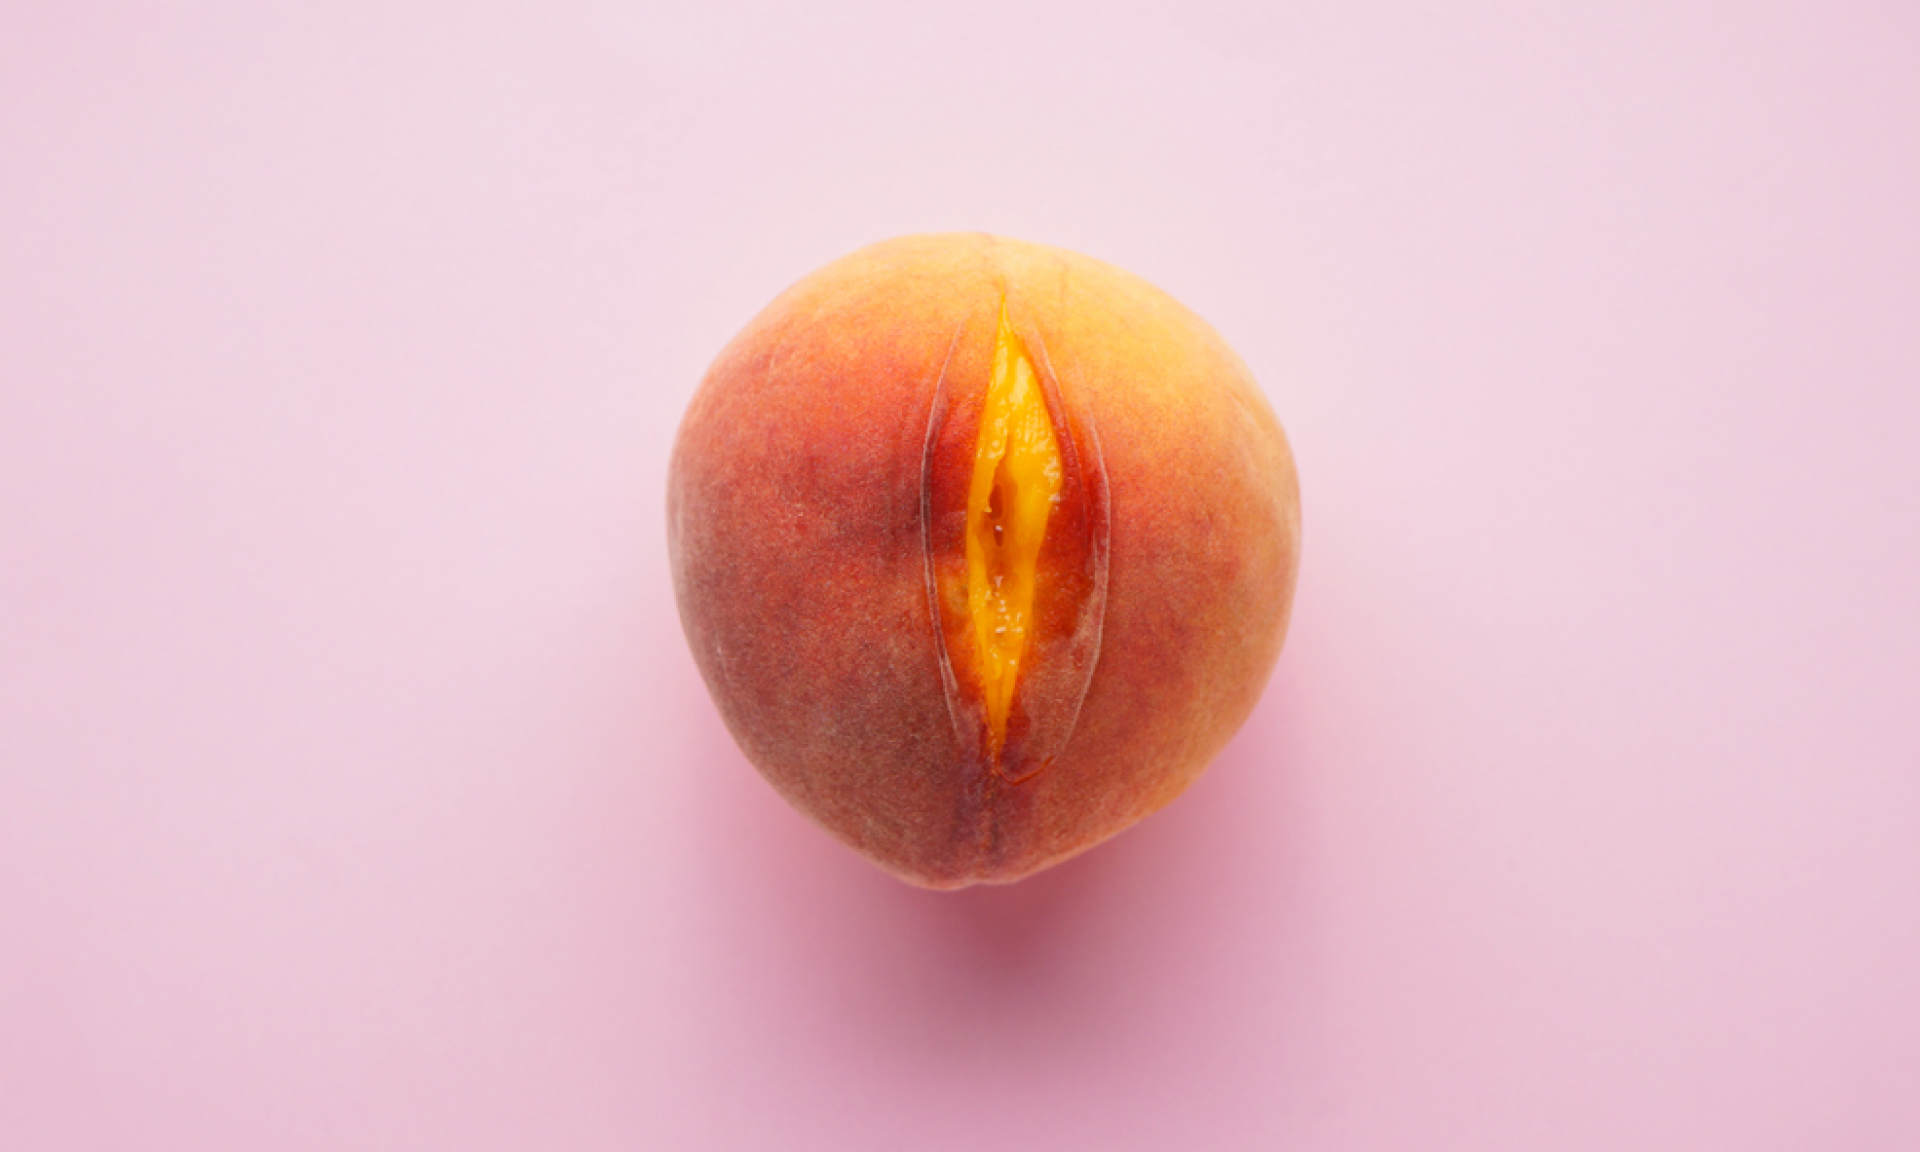 A peach slightly cut to look like a vulva on a pink background